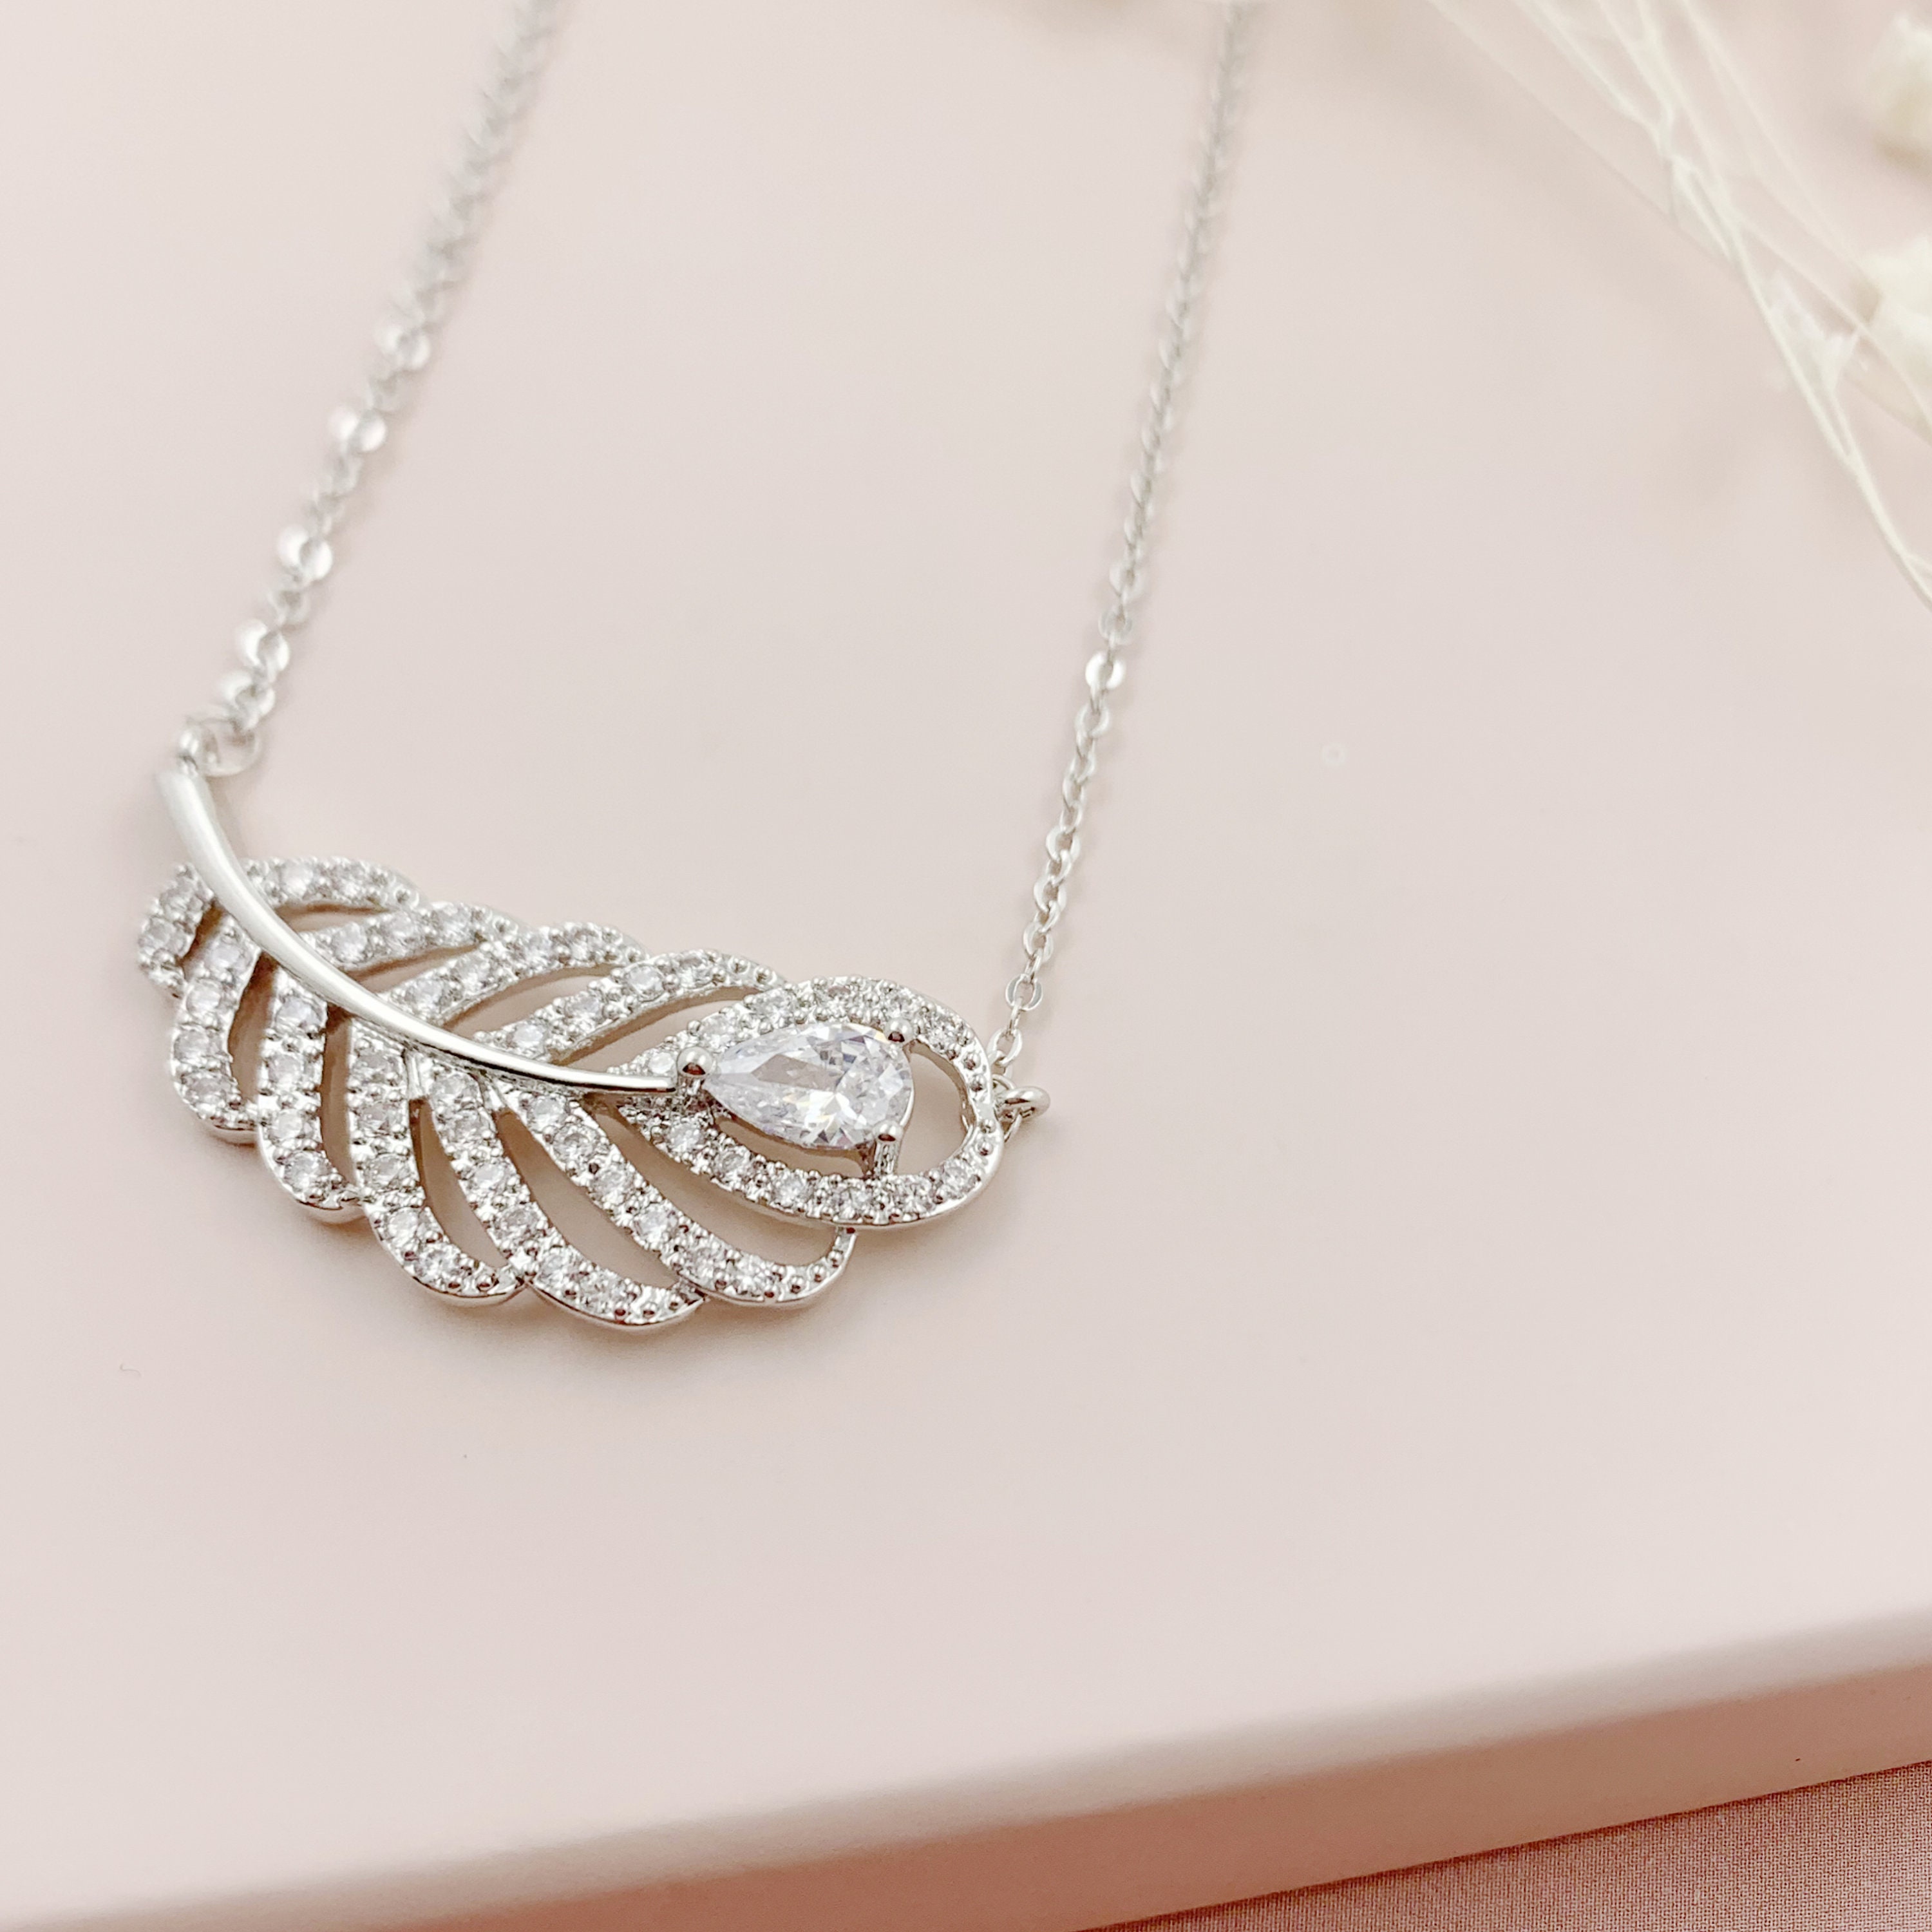 White Gold Baguette Diamond Feather Necklace, Diamond Cluster Pendant with  18 Chain, Autumn Leaves Fine Jewelry